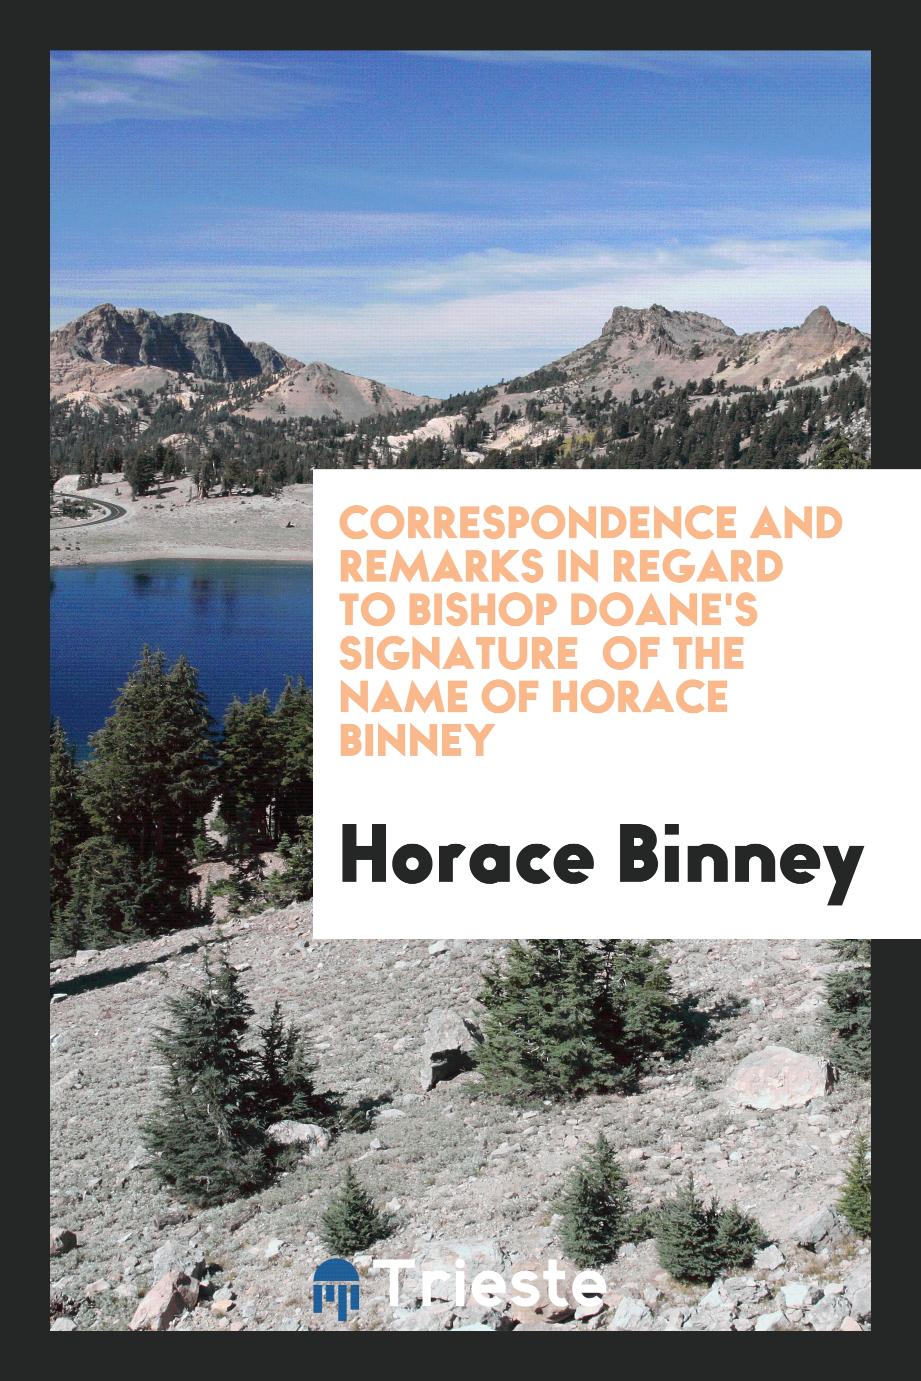 Correspondence and Remarks in Regard to Bishop Doane's Signature of the Name of Horace Binney